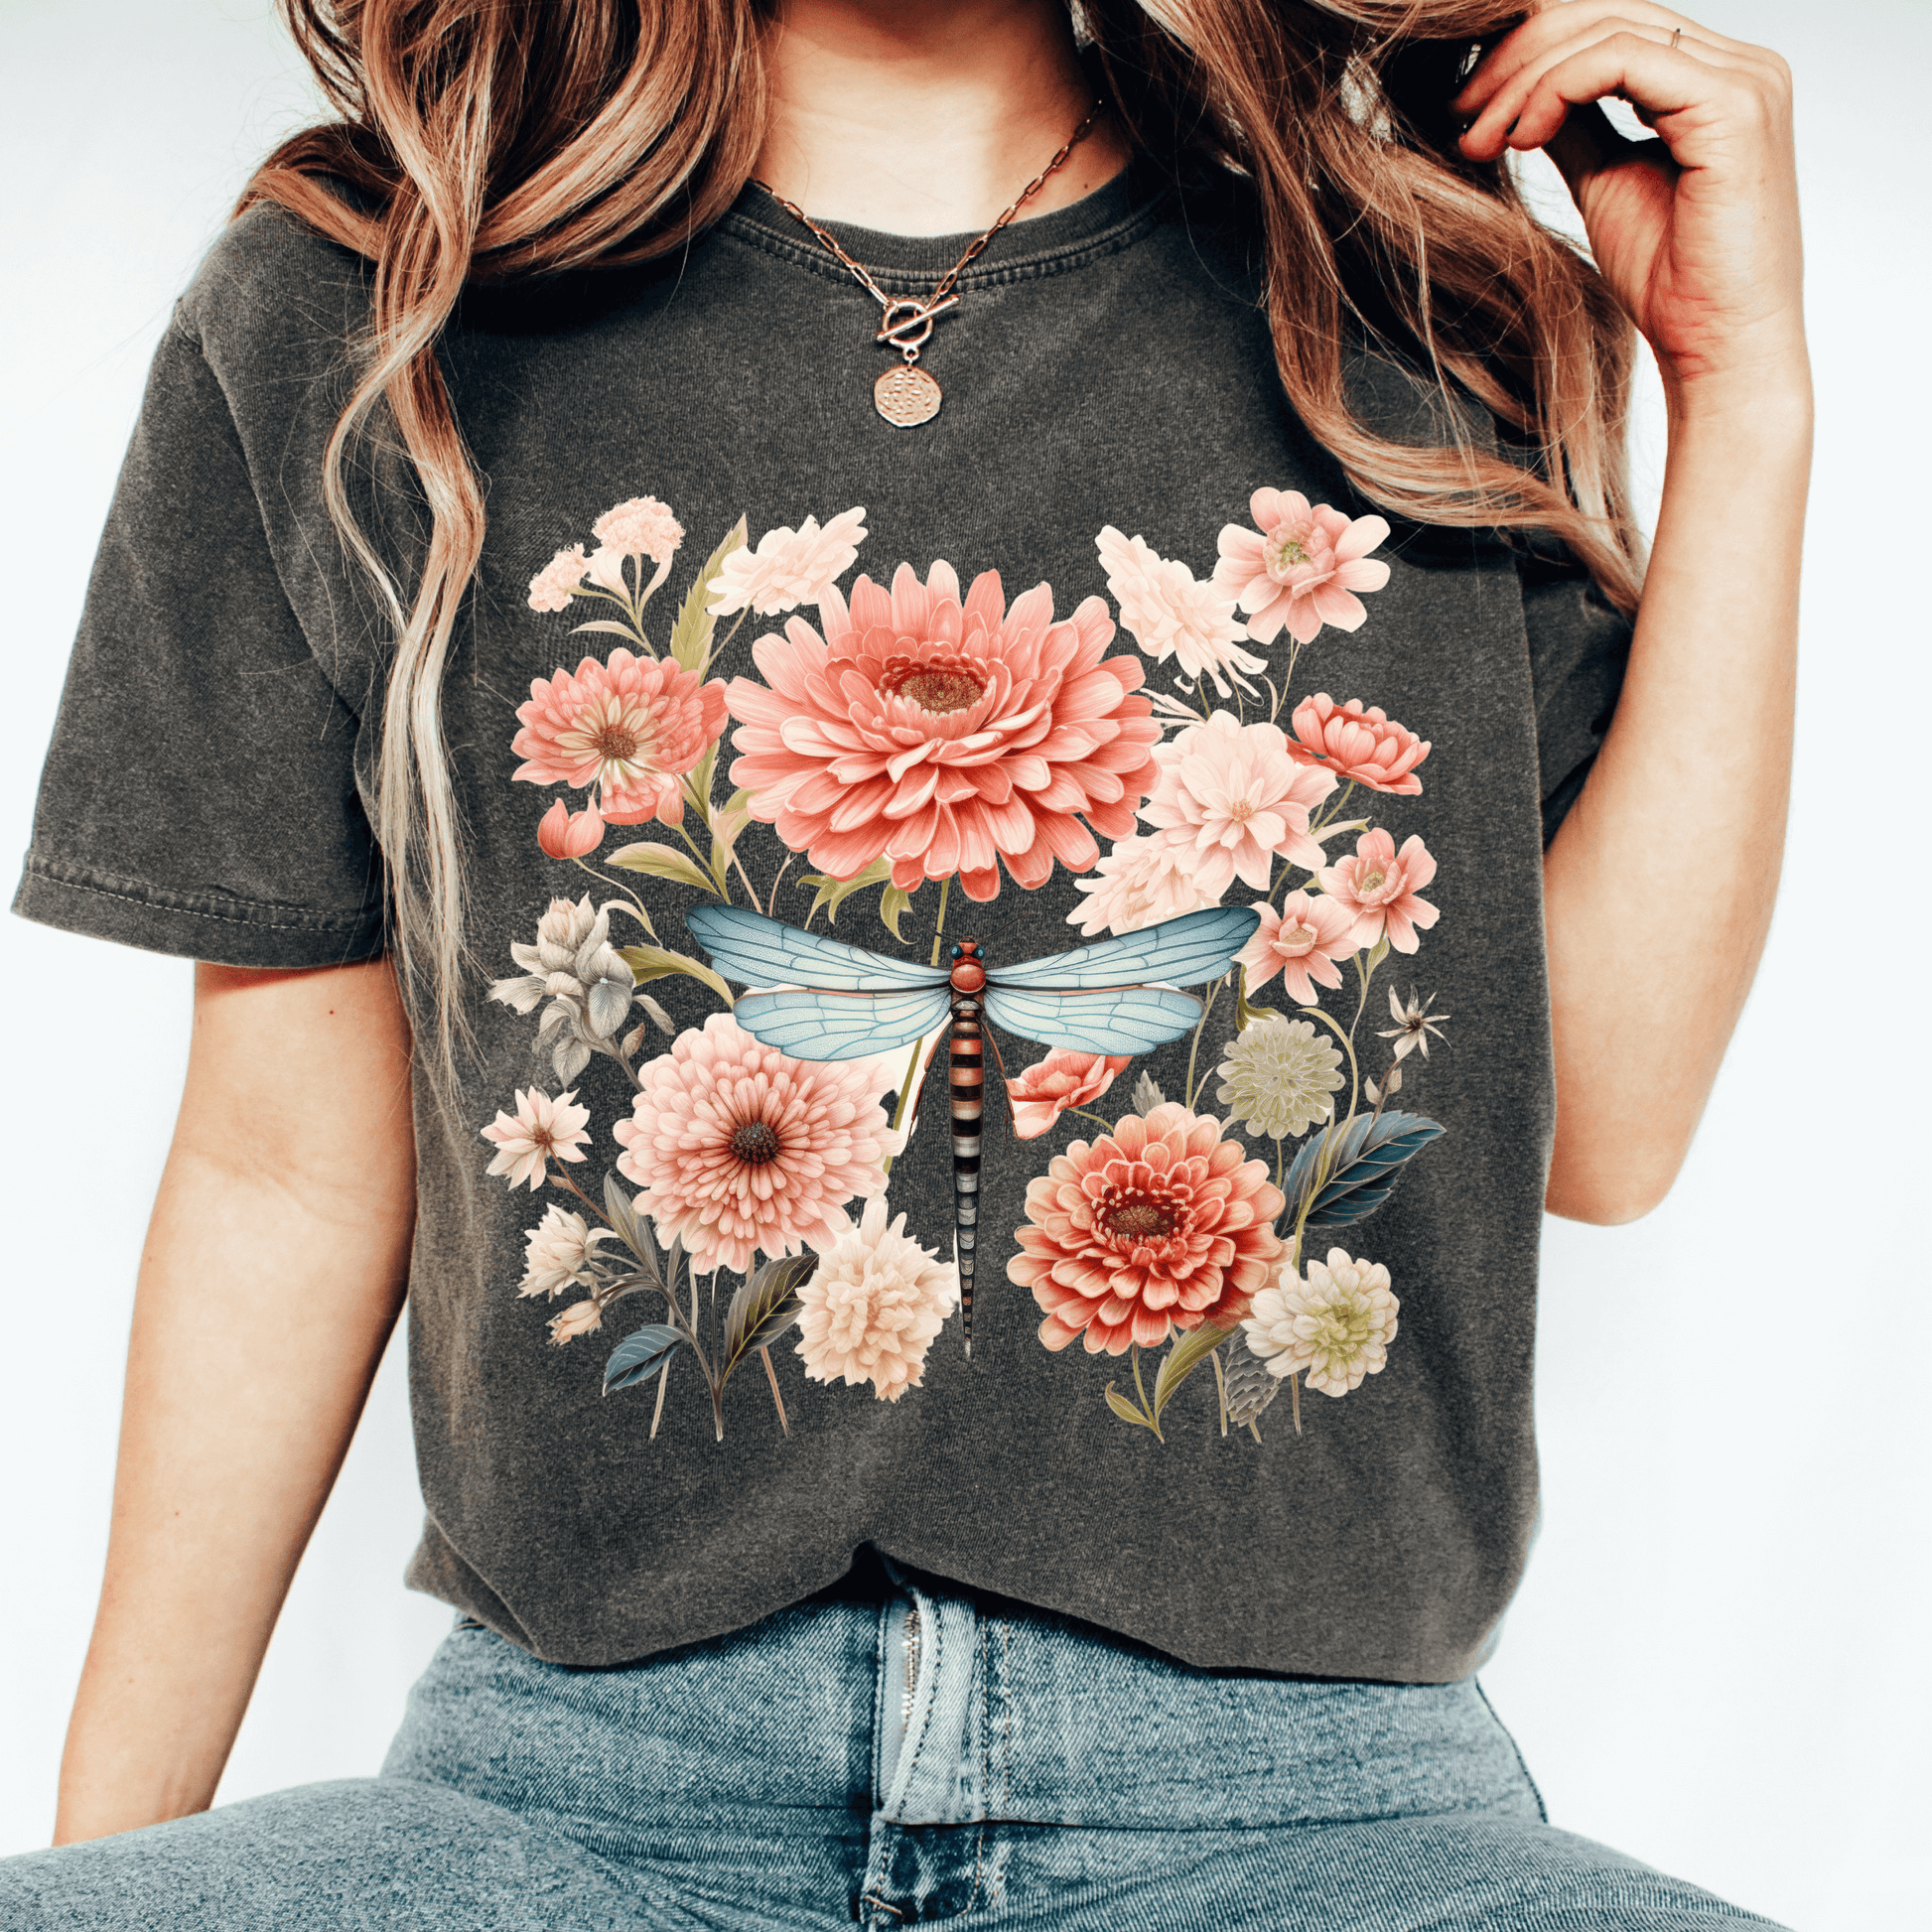 Blooming Dahlia flowers and dragonfly on Comfort Colors shirt in Pepper